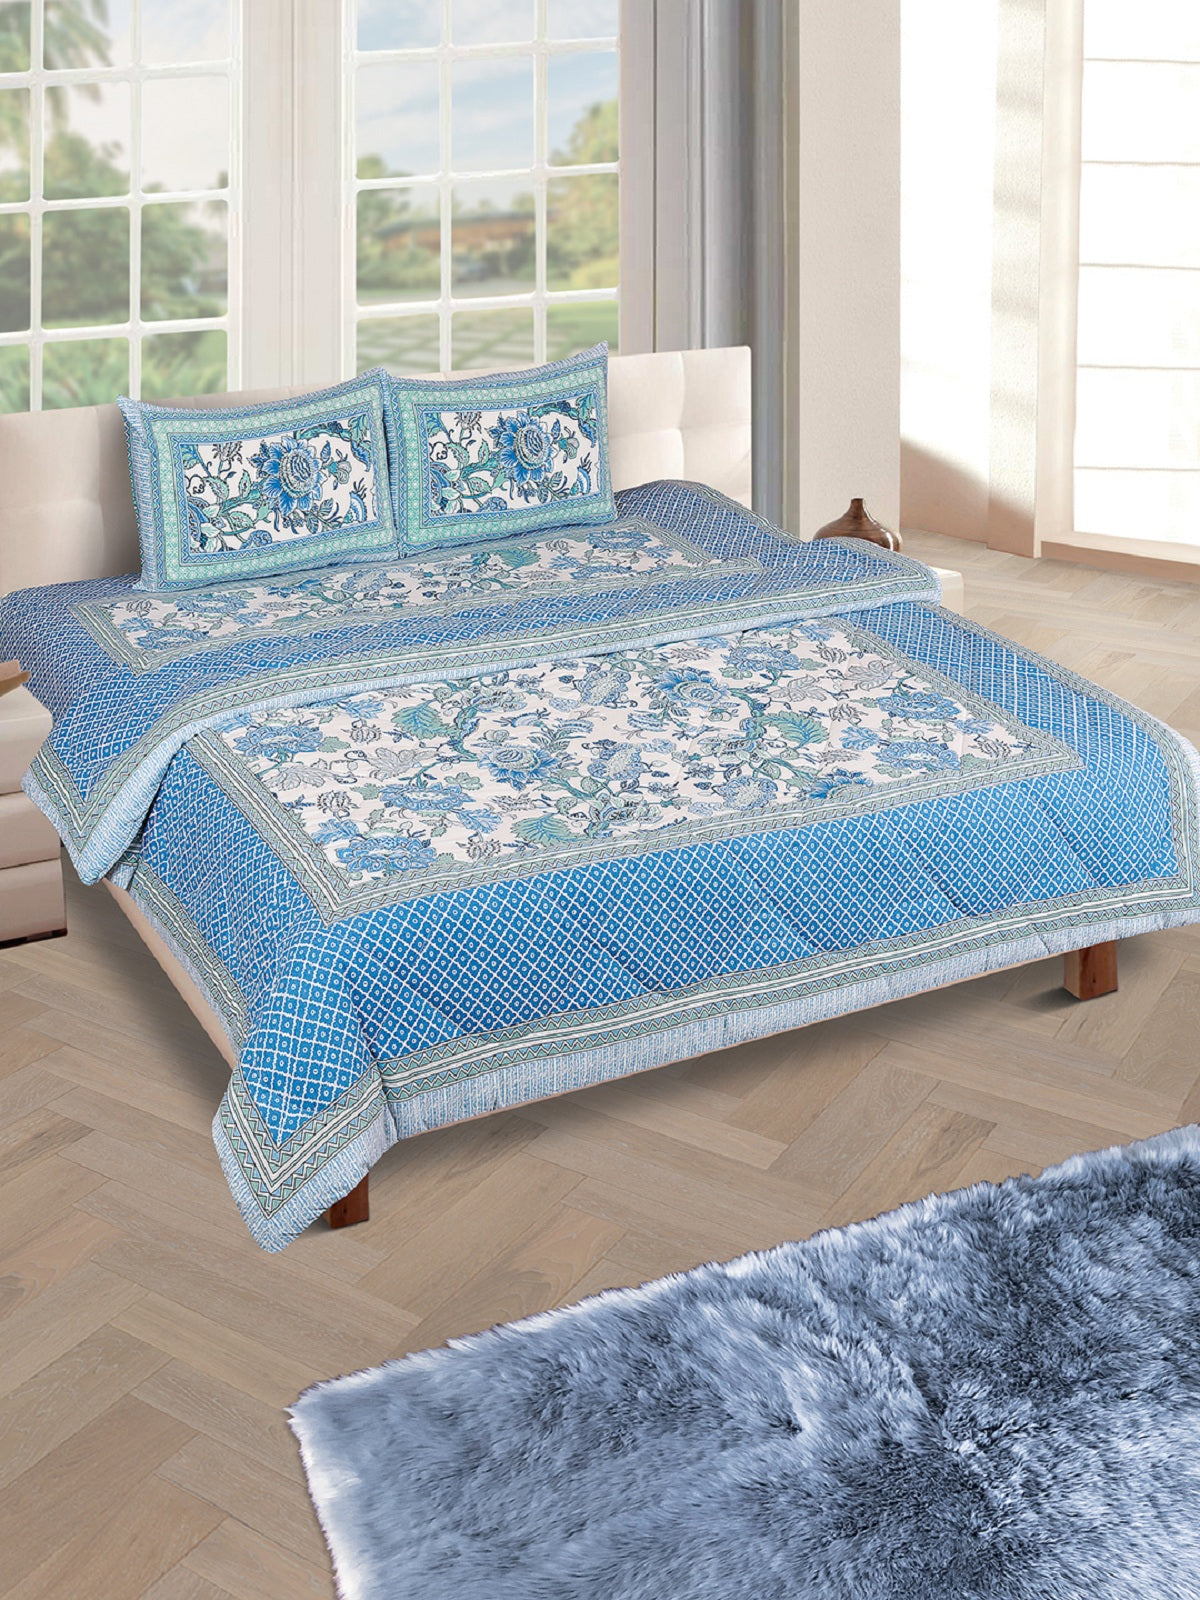 Jaipuri Bedding Set Quilt With King Size Bedsheet and 2 Pillow Covers, Blue & White